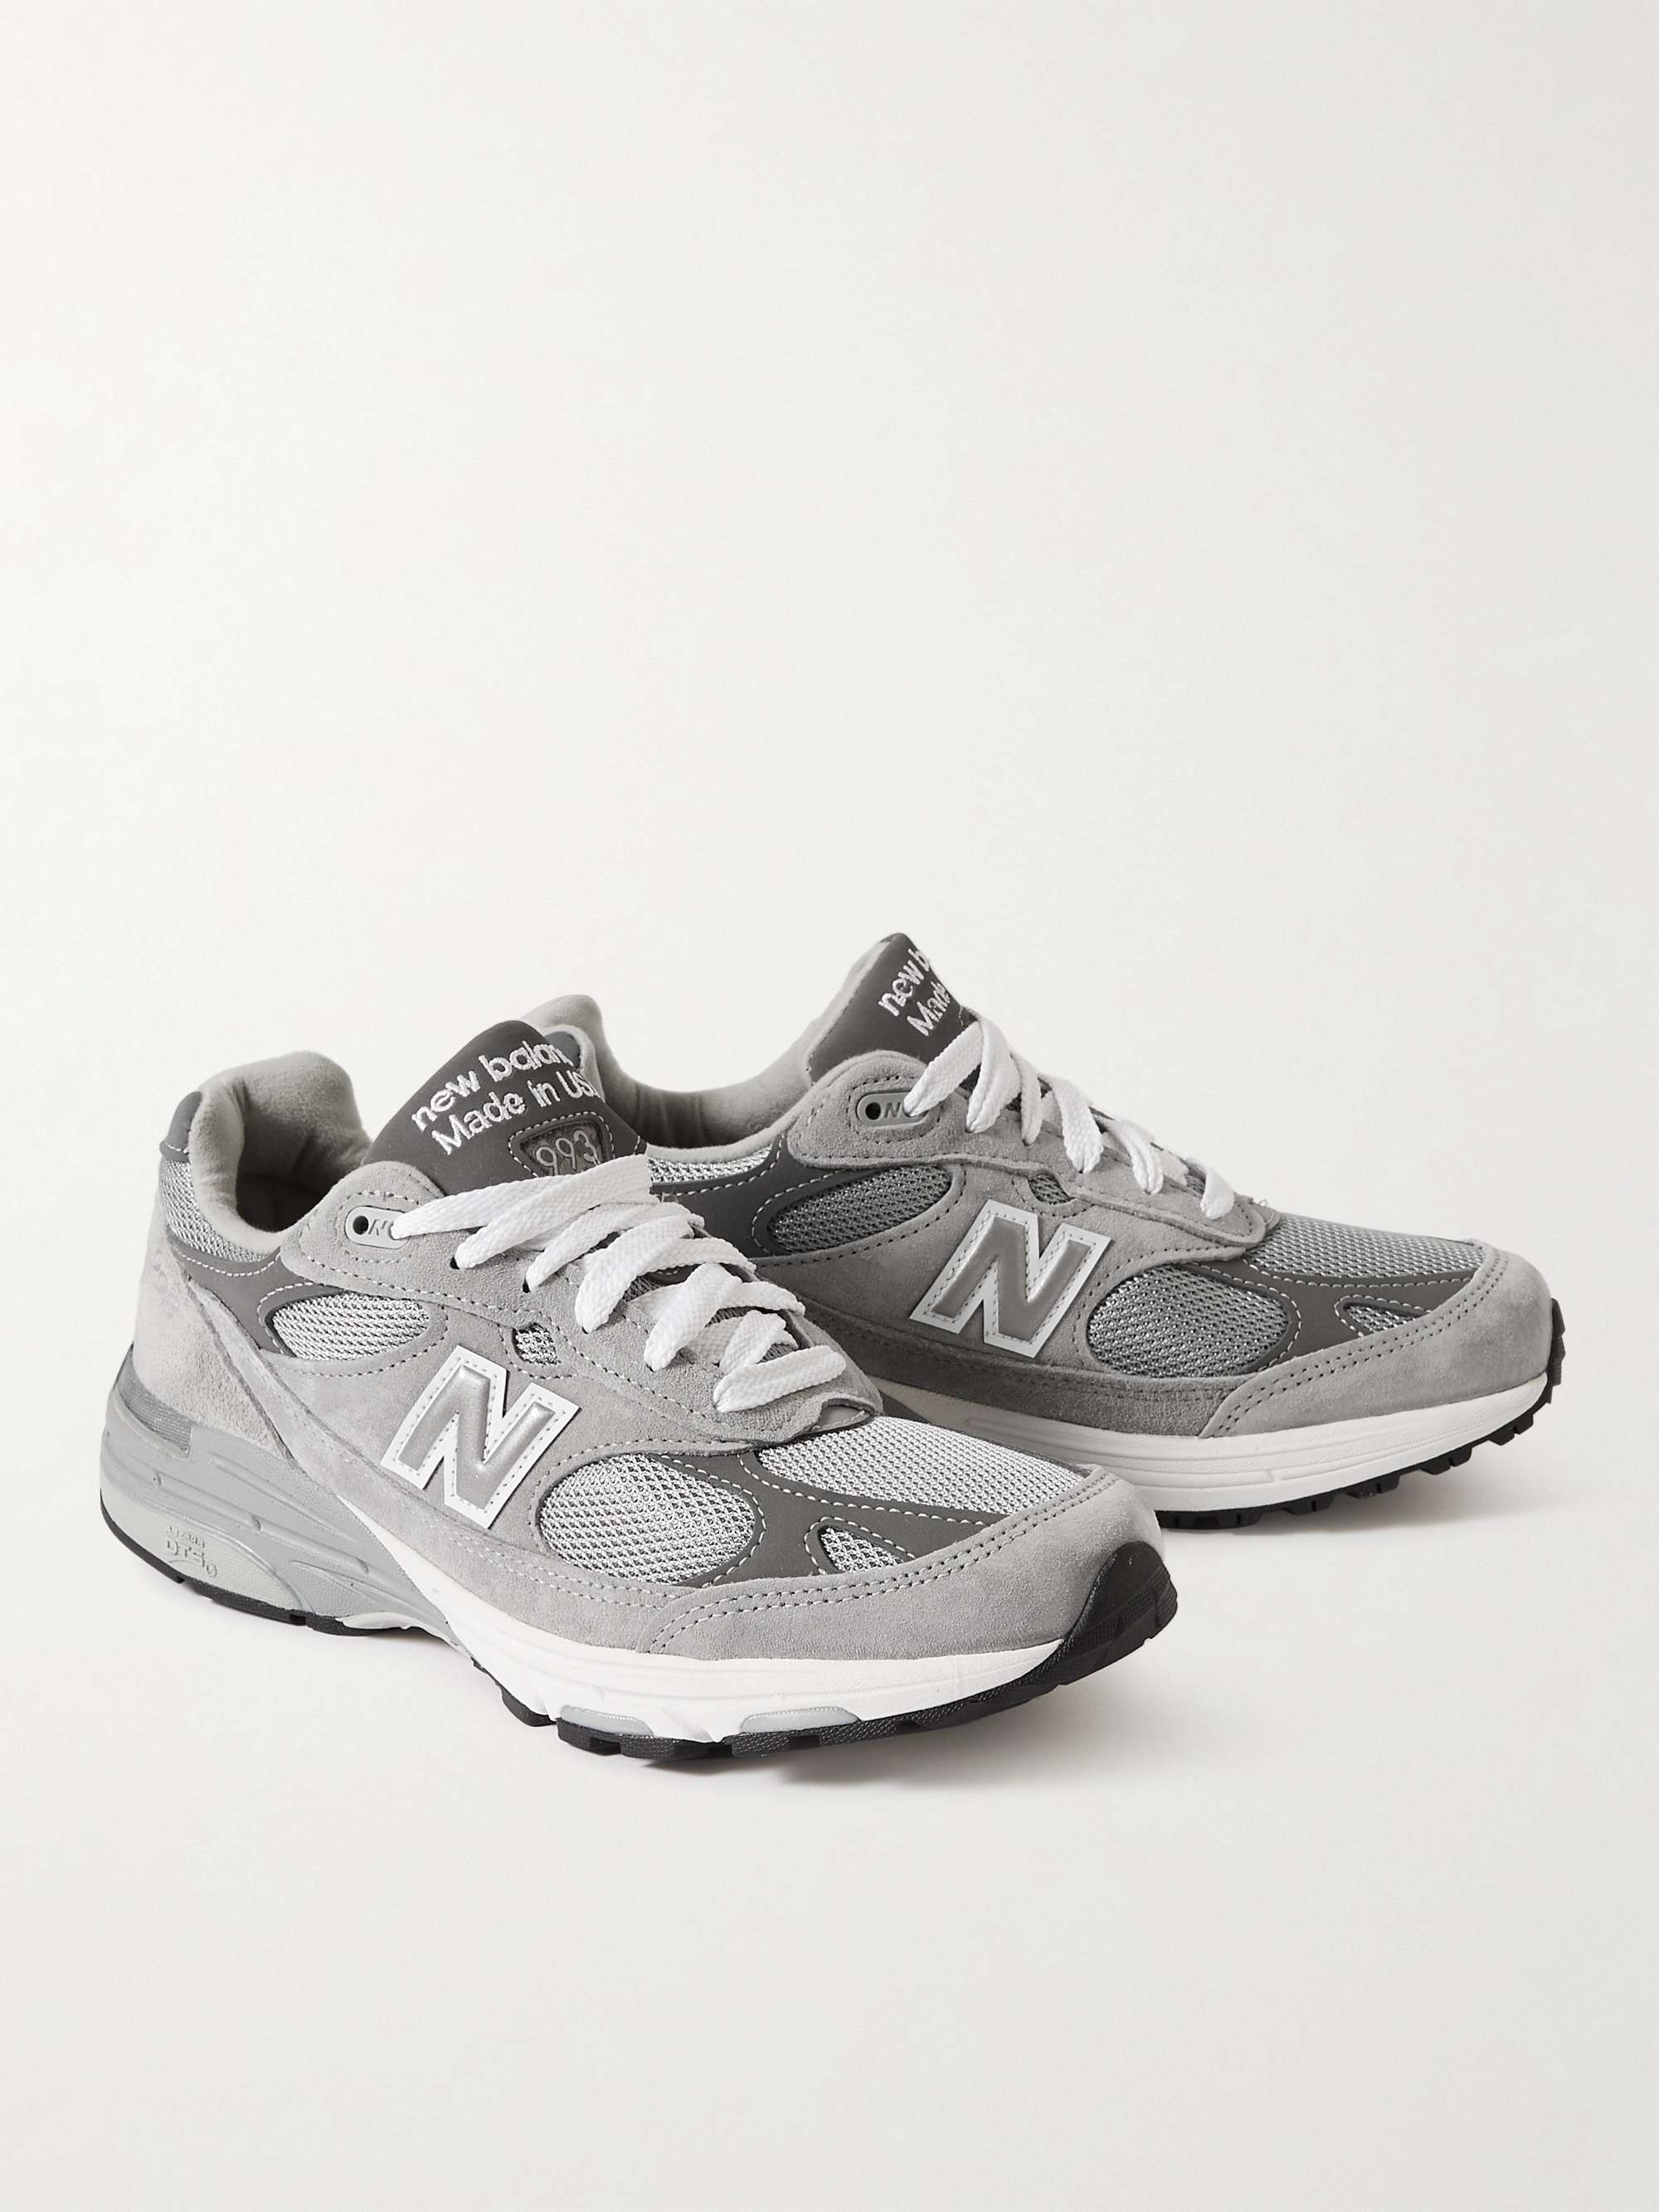 NEW BALANCE MIUSA 993 Suede, Mesh and Leather Sneakers